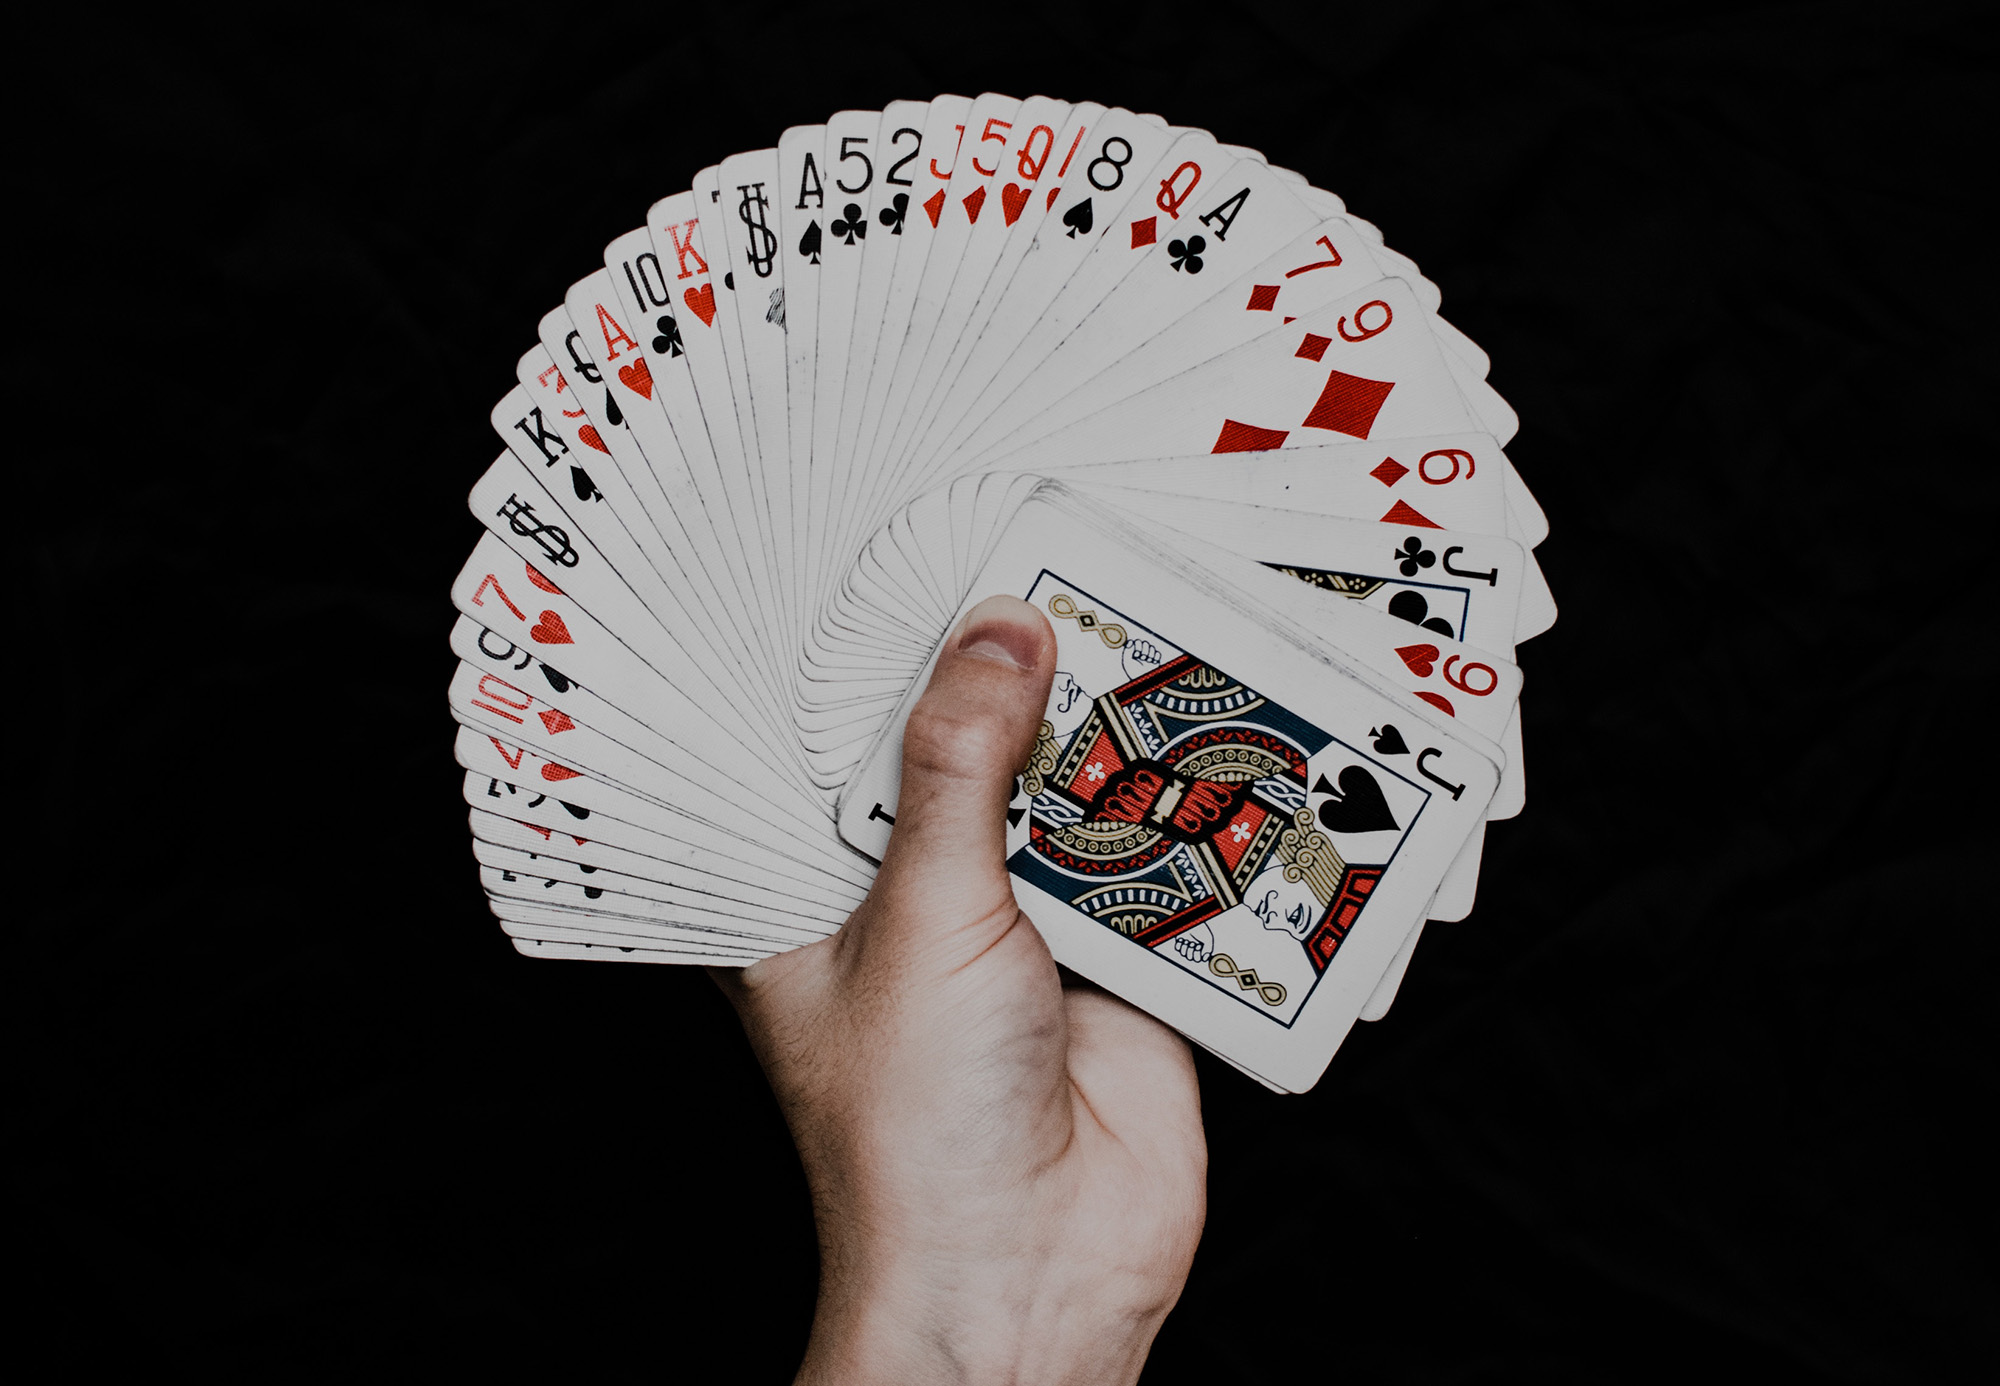 Mentalist vs. Magician: Which Should You Book For Your Event?